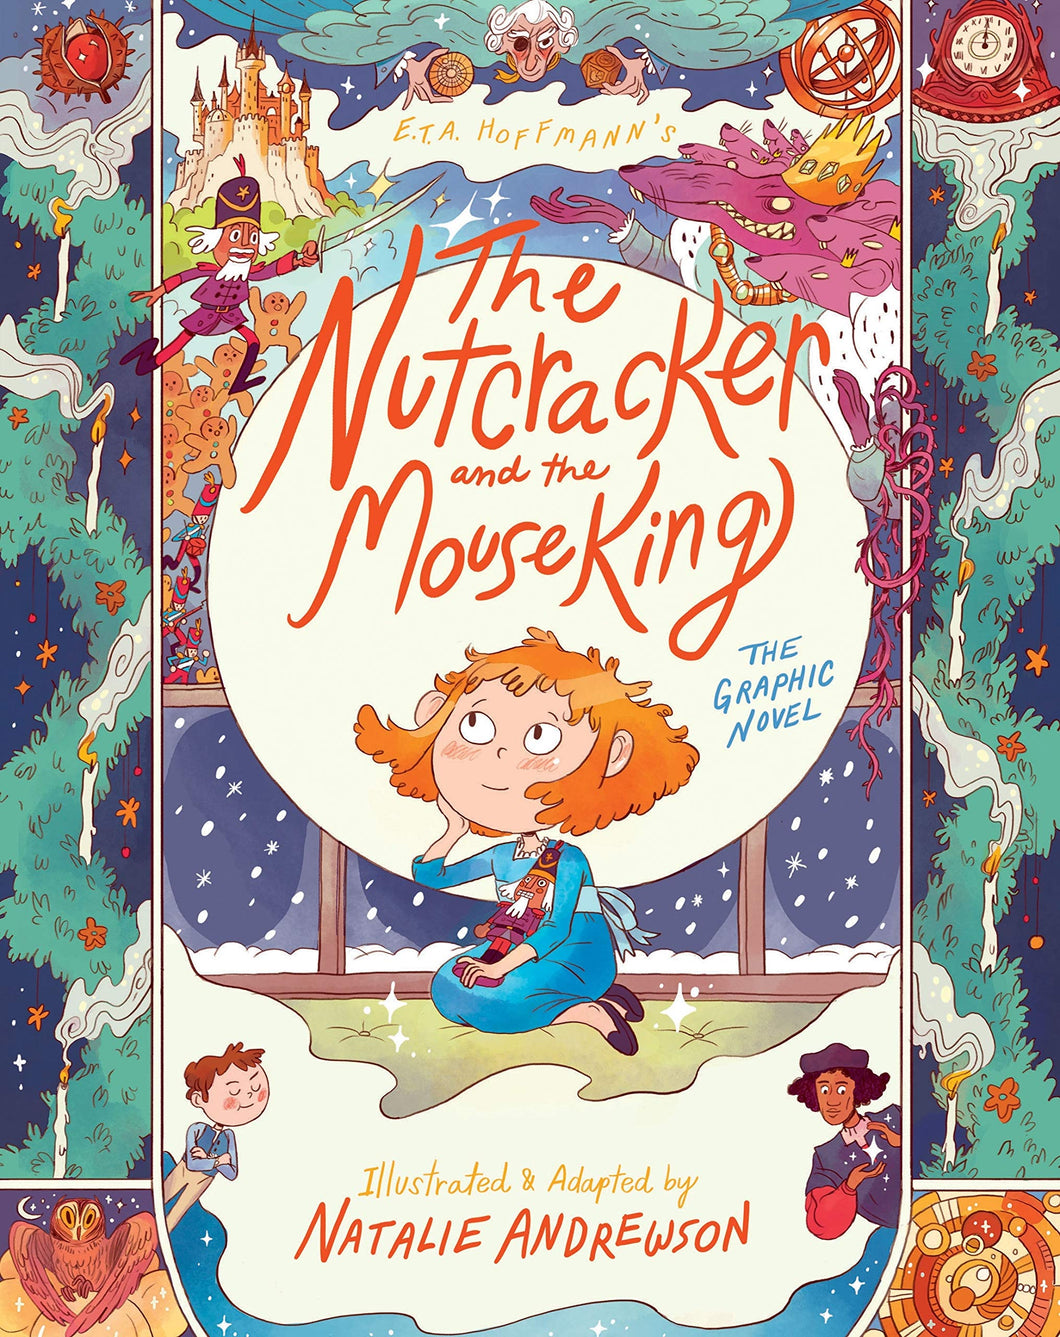 The Nutcracker and the Mouse King: The Graphic Novel by Natalie Andrewson (E.T.A. Hoffmann)